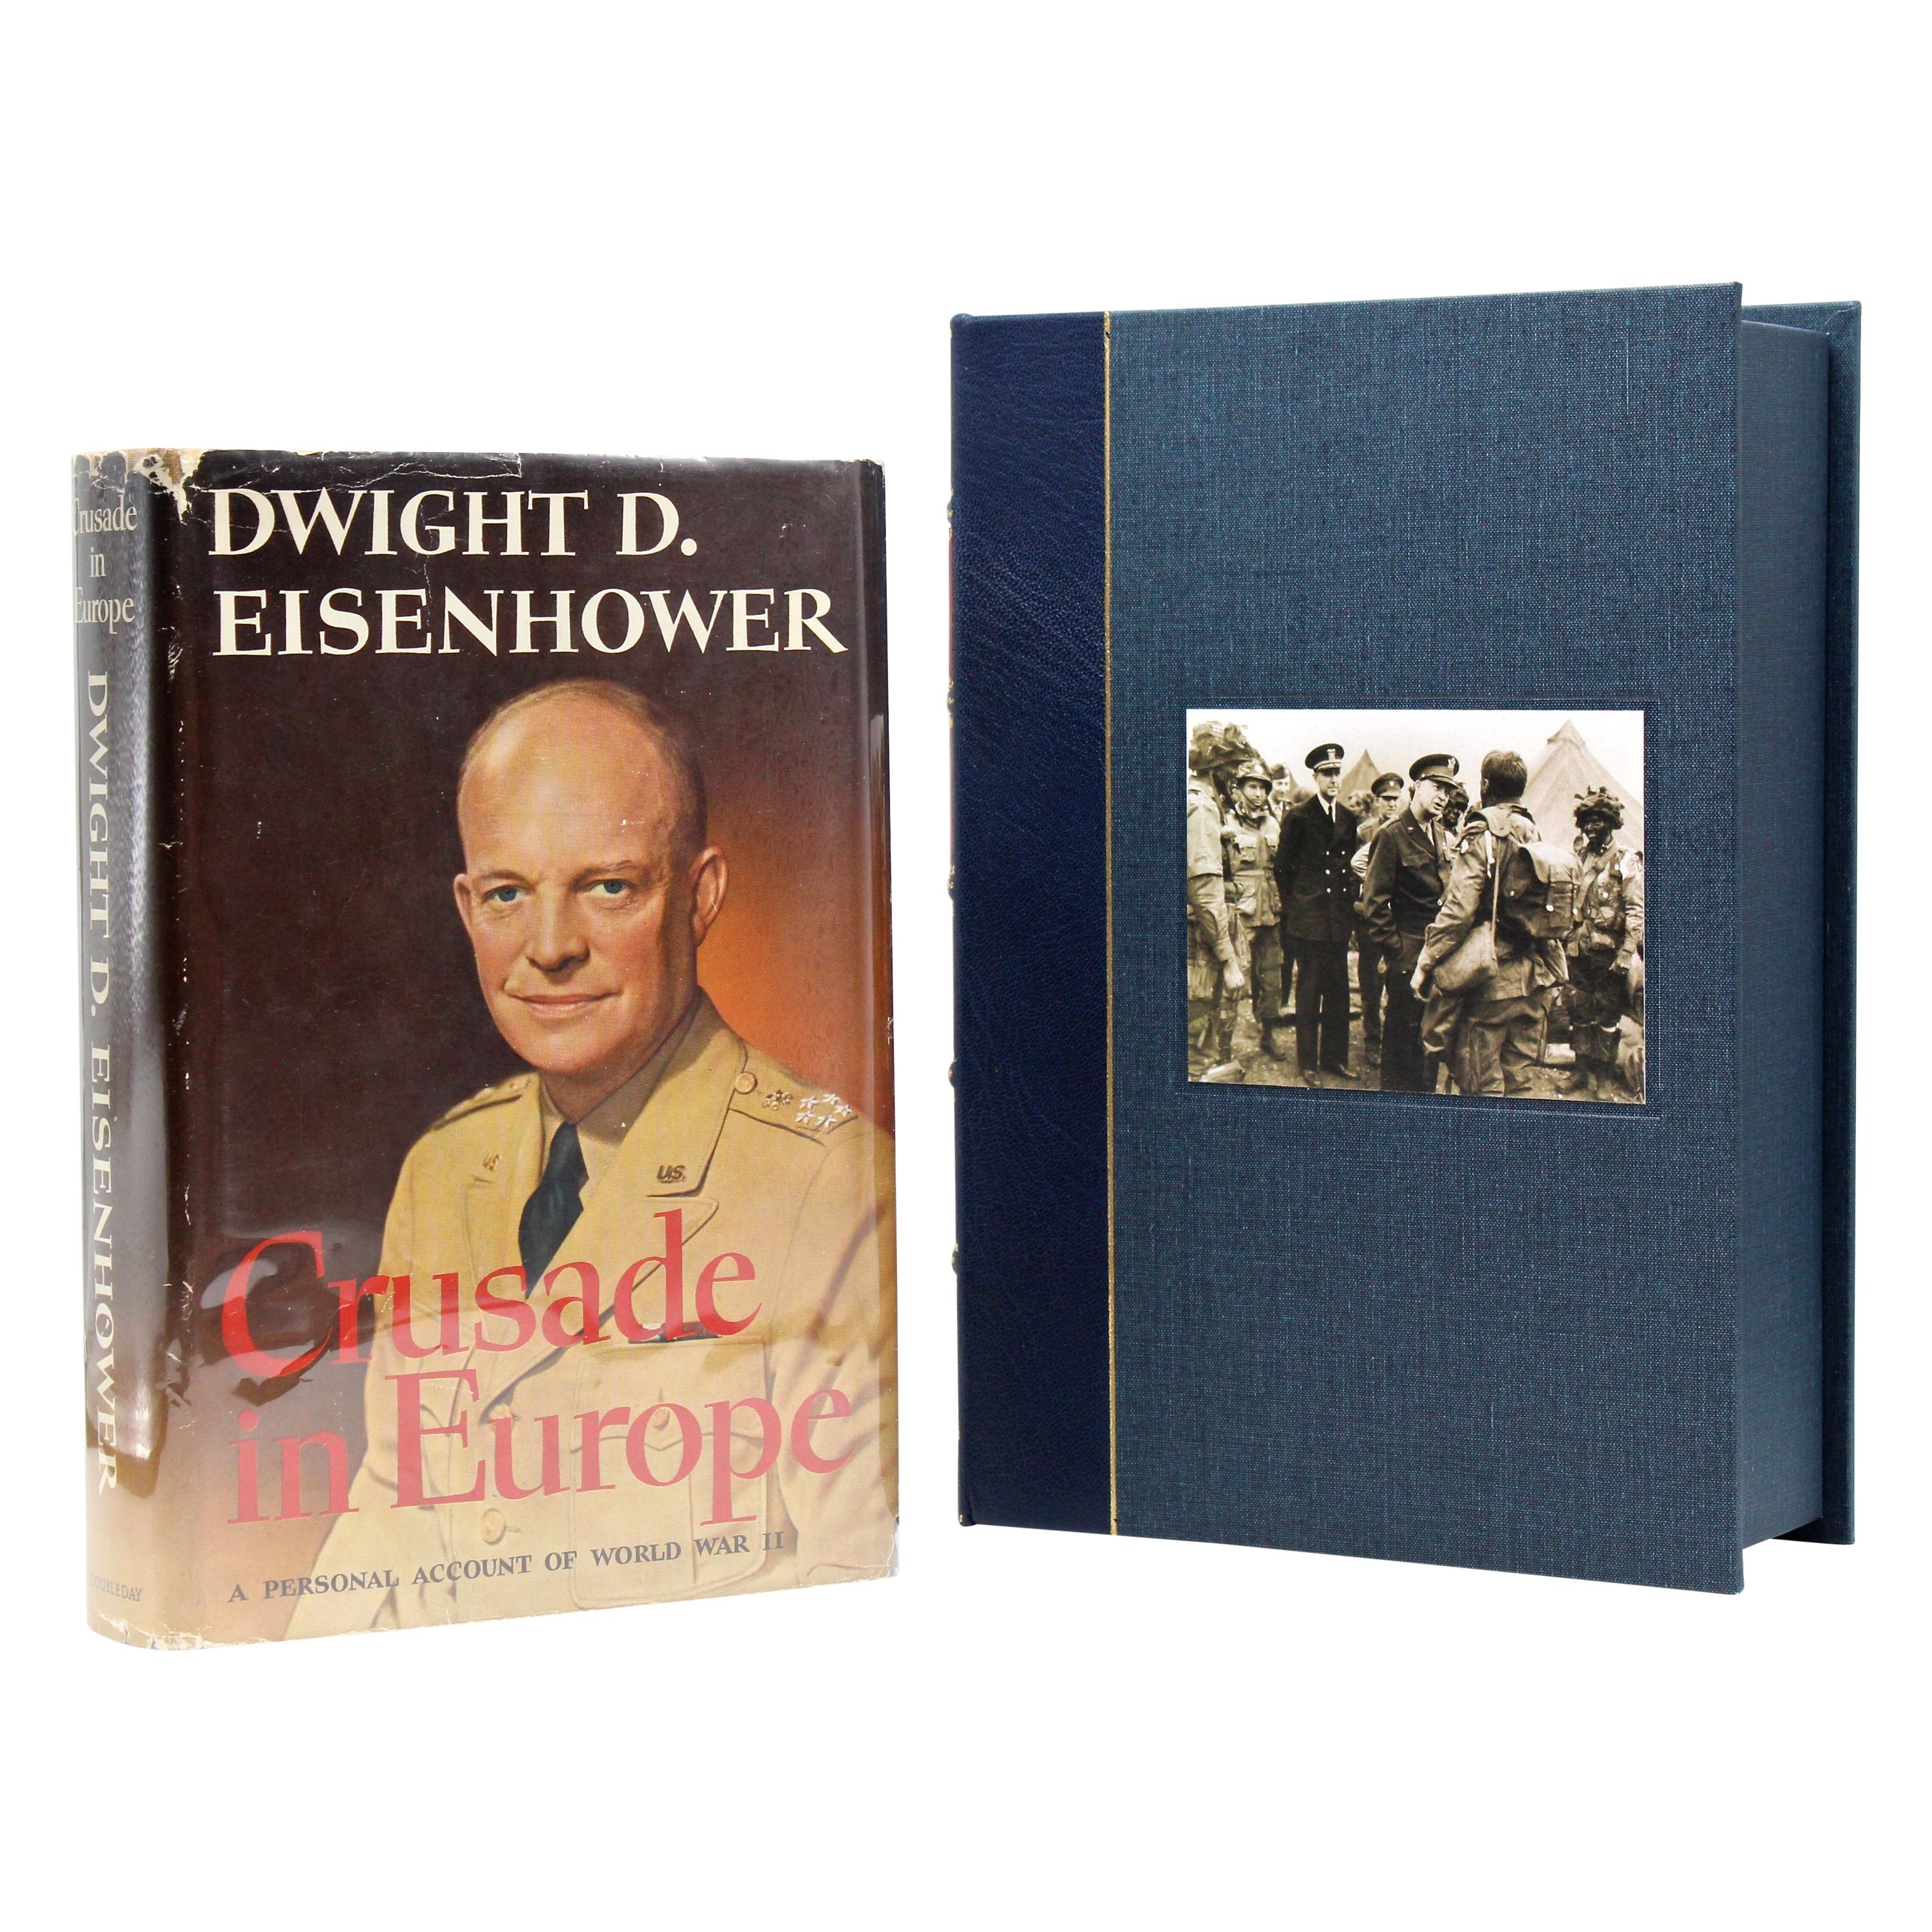 Crusade in Europe, Signed by Dwight D. Eisenhower, First Edition, 1948